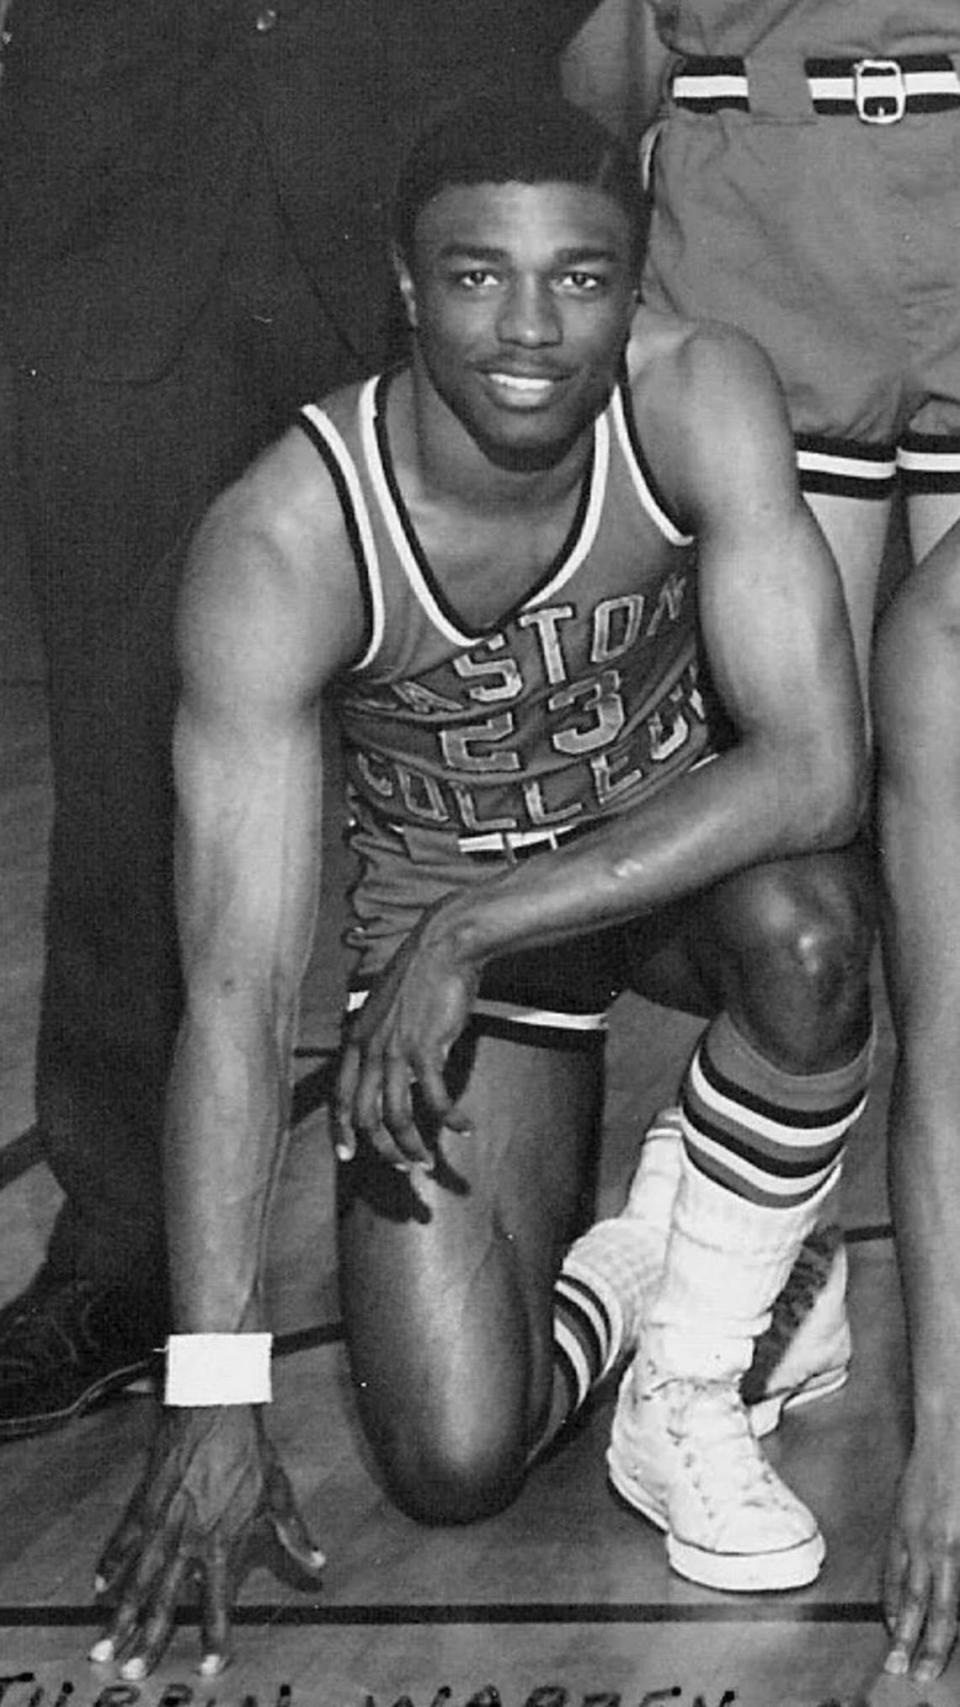 Leonard Hamilton during the 1967-68 college basketball season, as a member of the Gaston College team. Hamilton would later complete his career at UT-Martin, then go into coaching.